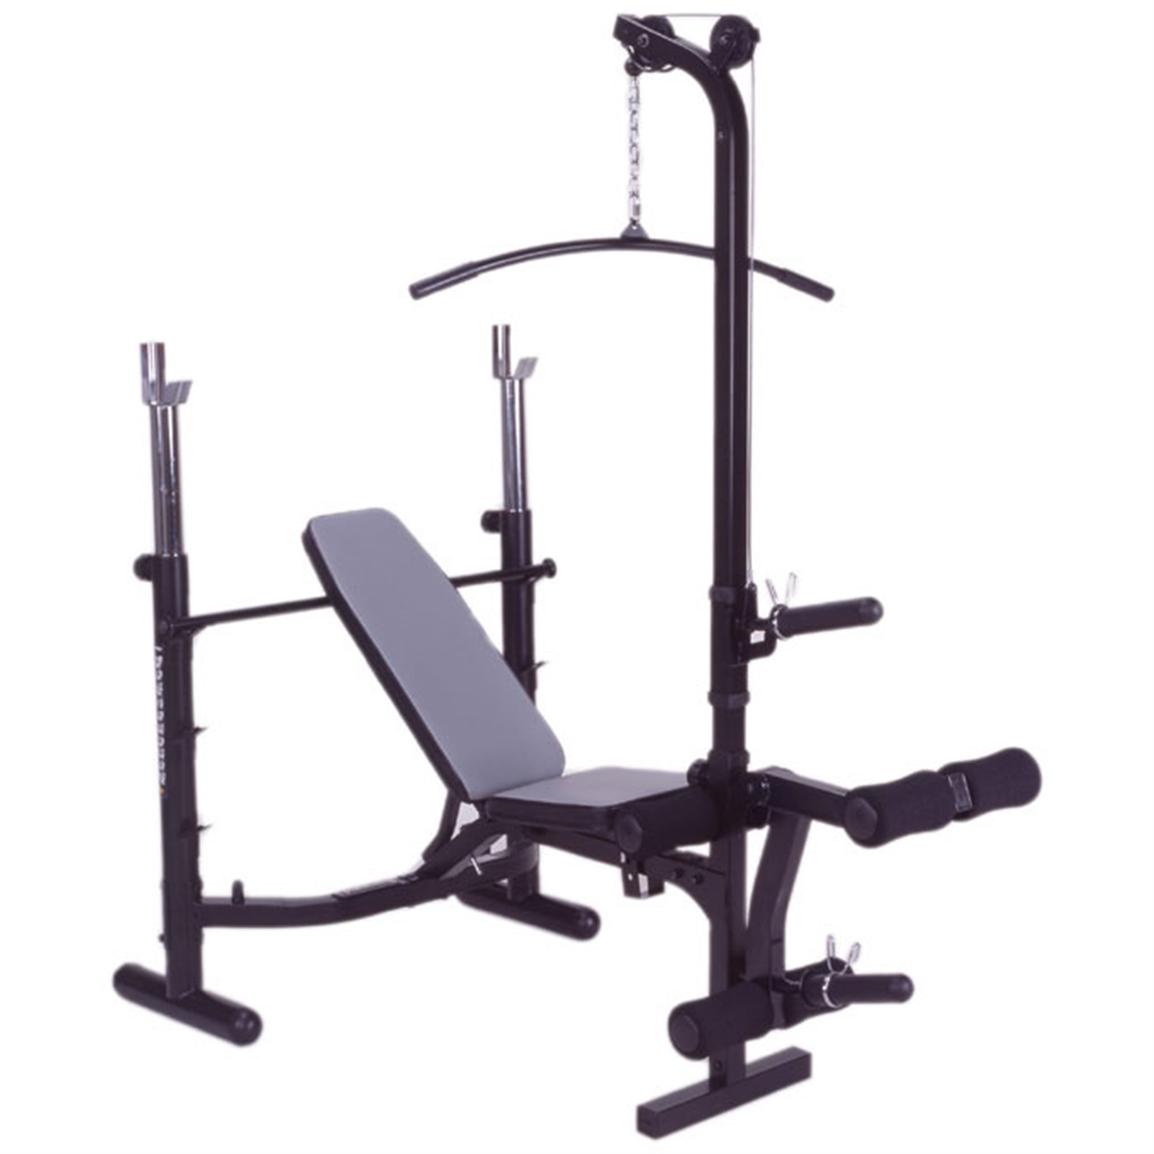 Weight Bench Impex Powerhouse 698 Weight Bench